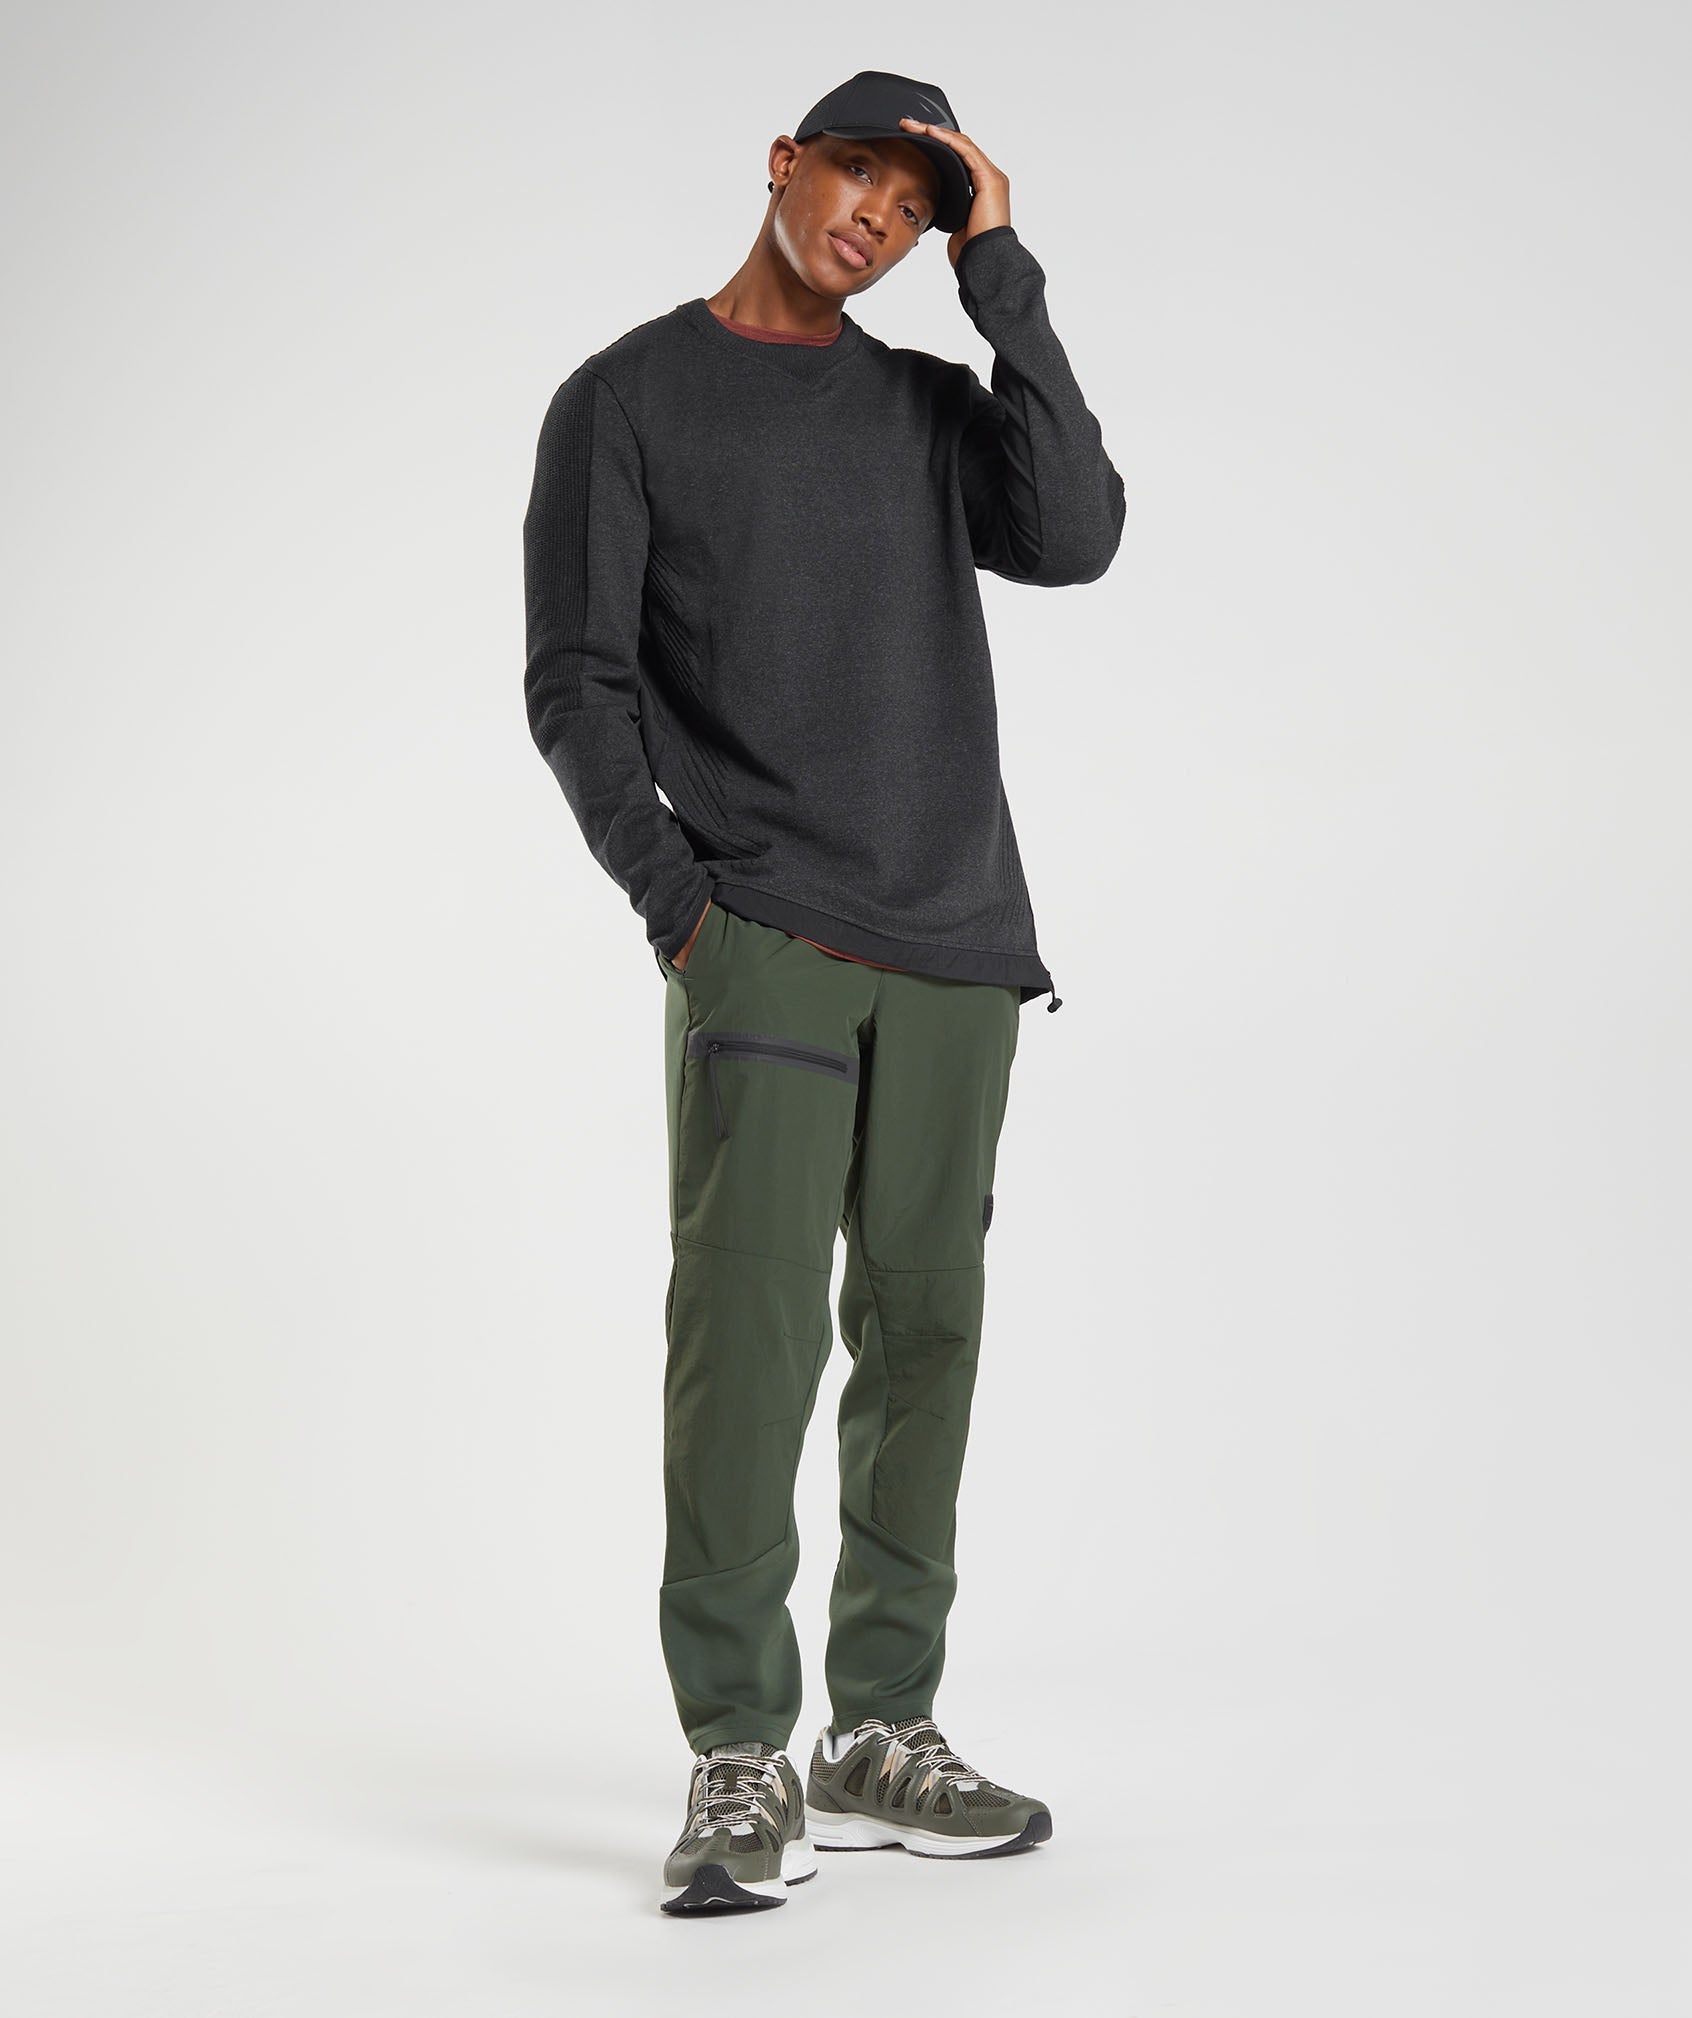 Retake Woven Joggers in Moss Olive - view 4